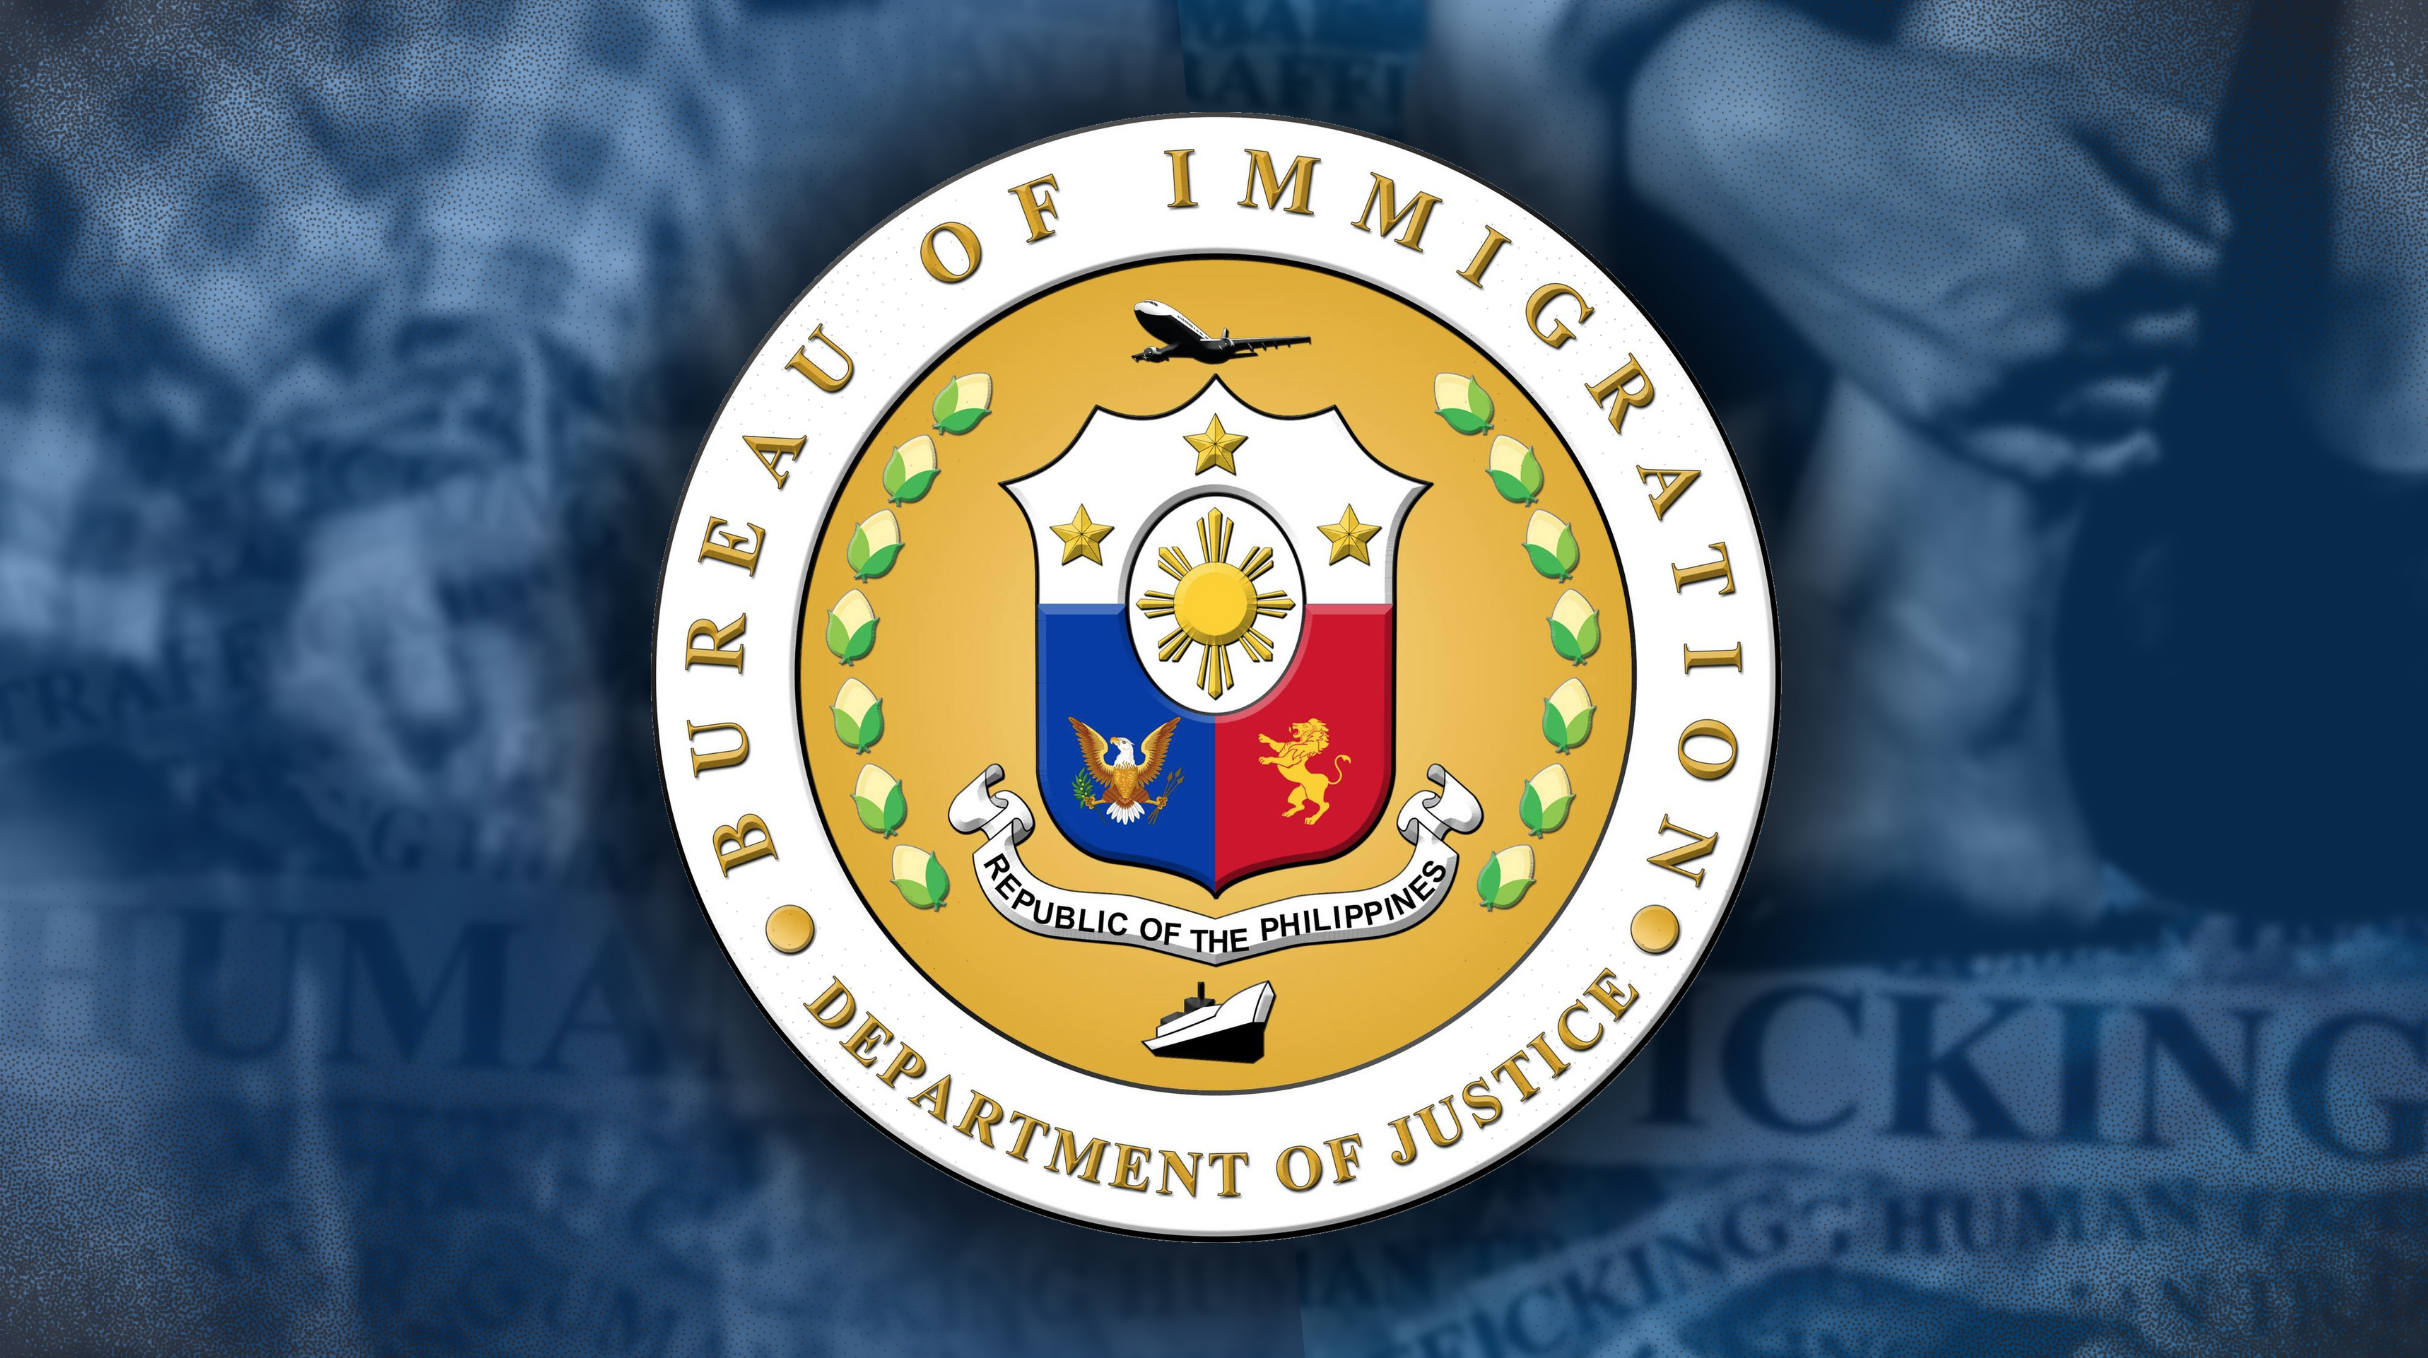 Batangas residents told: 'Report illegal aliens'